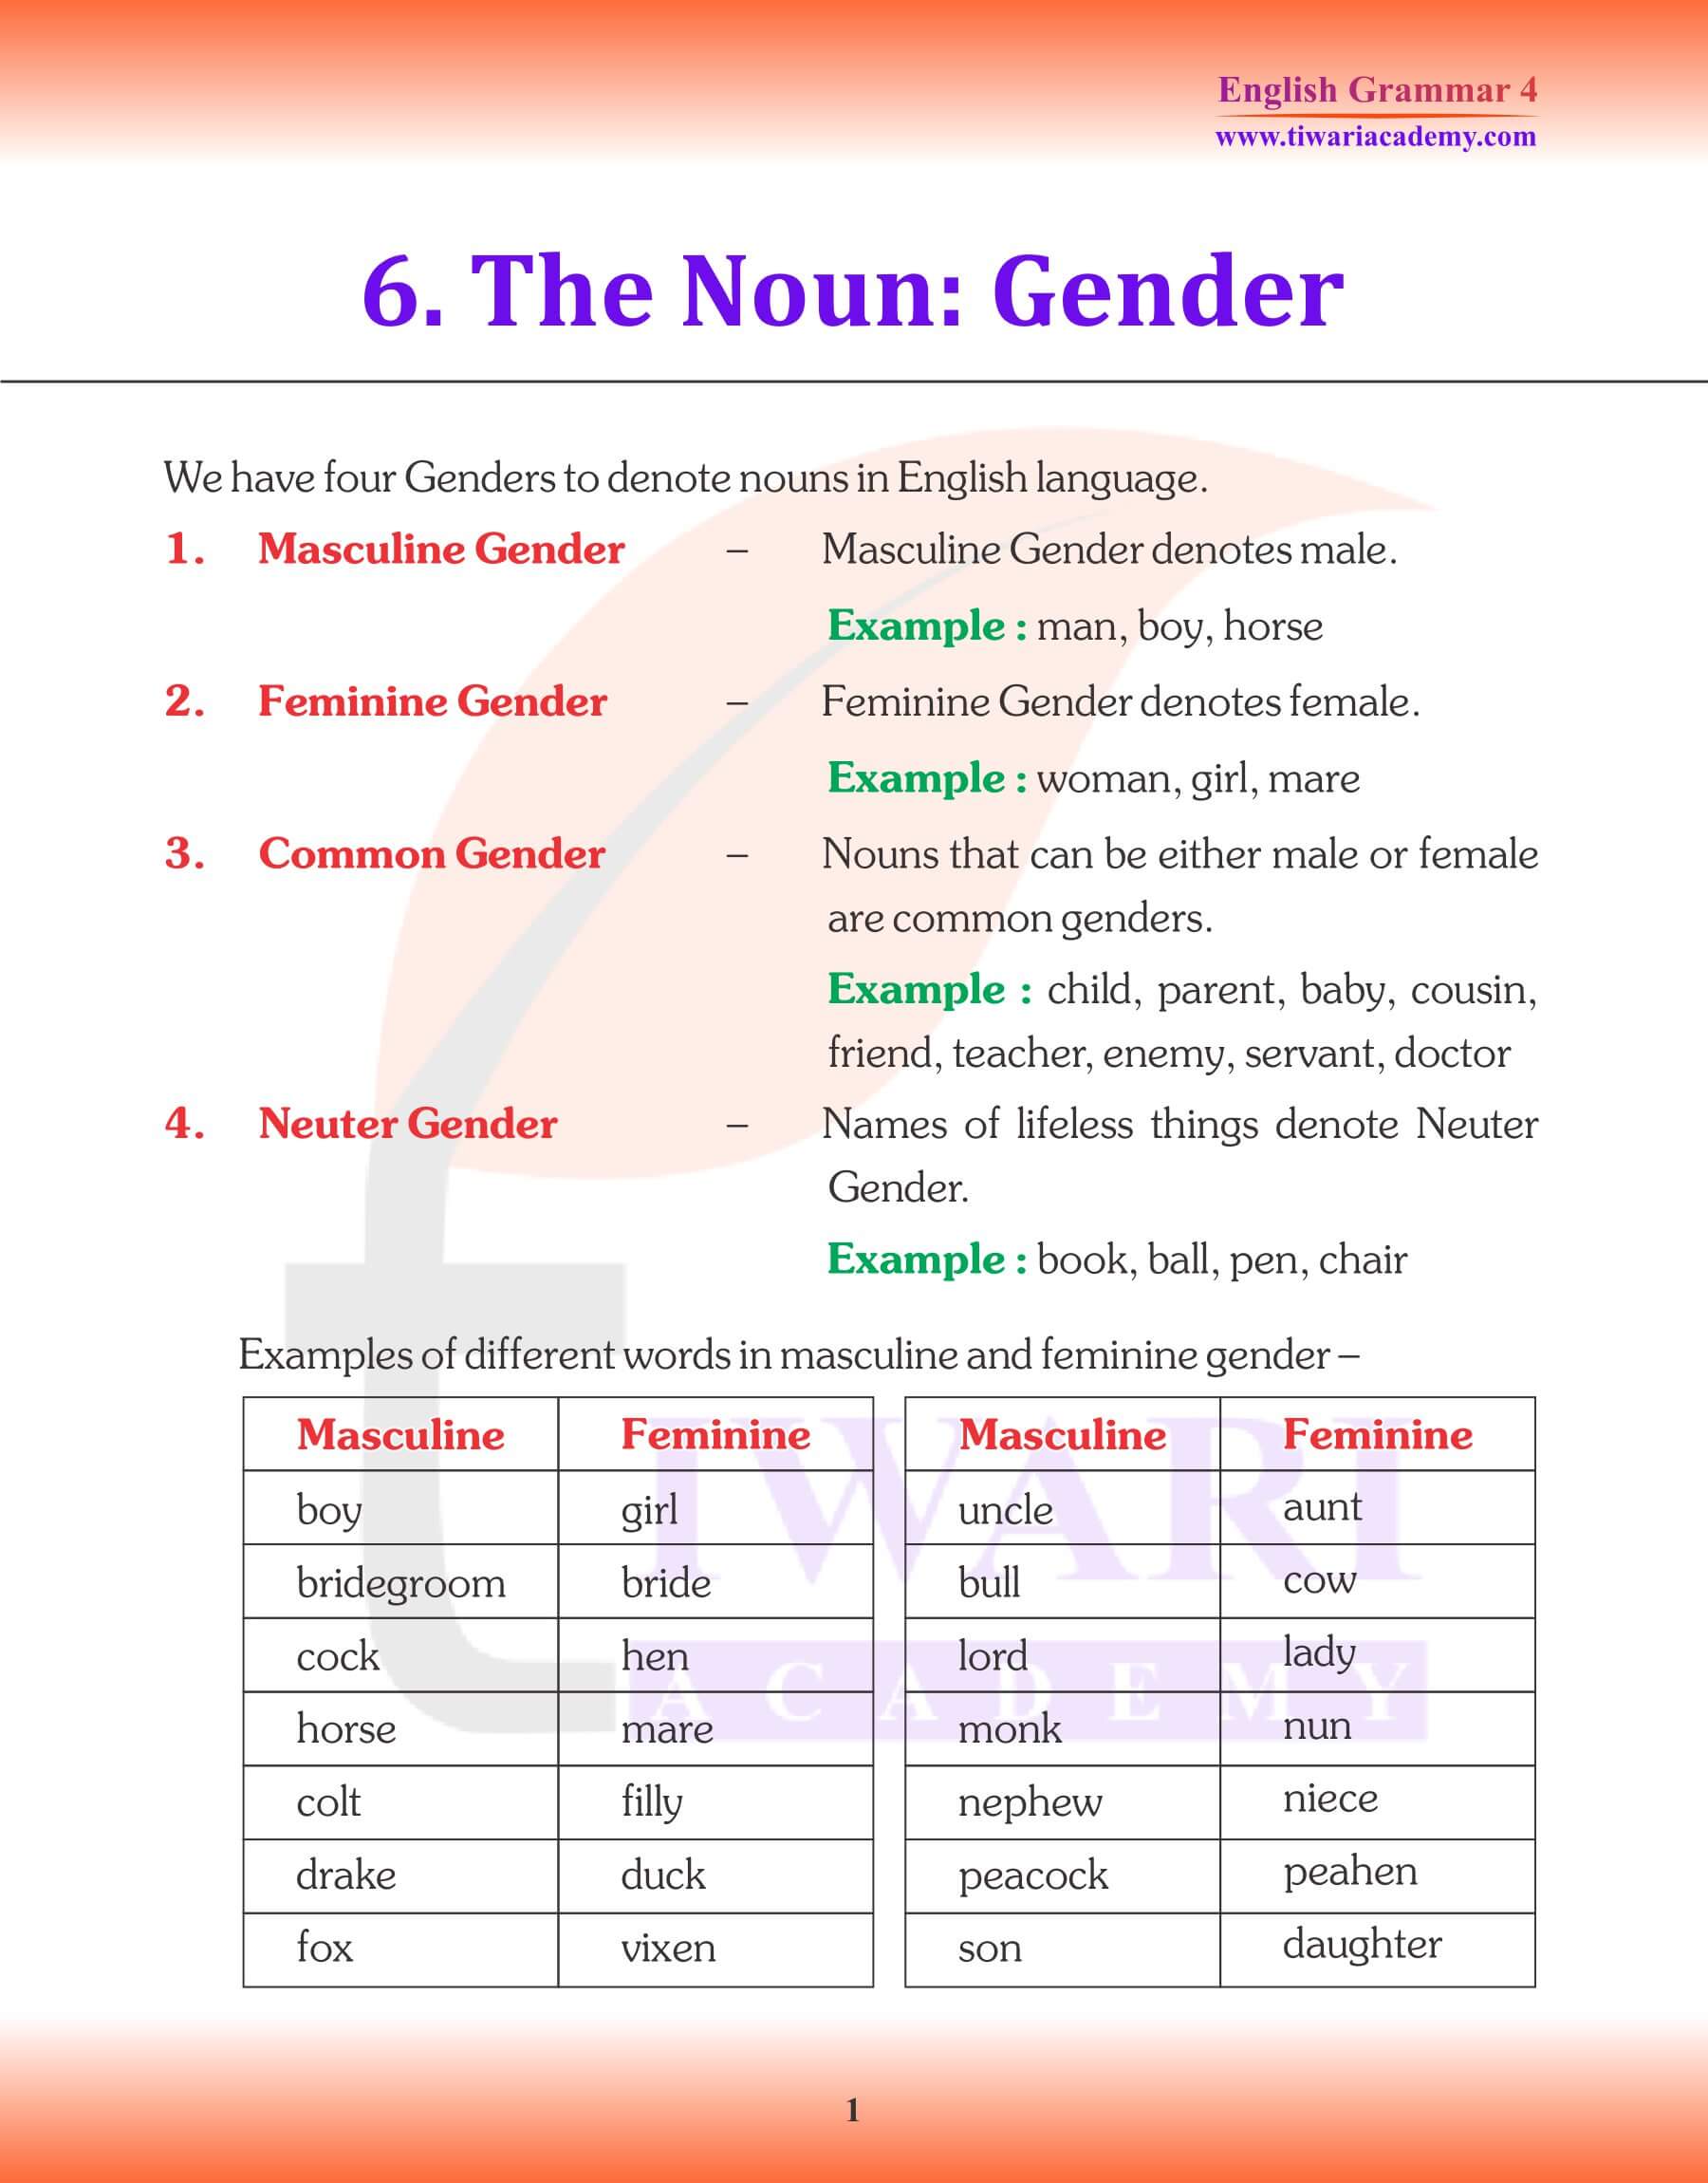 Revision of Class 4 English Grammar Chapter 6 The Noun Gender